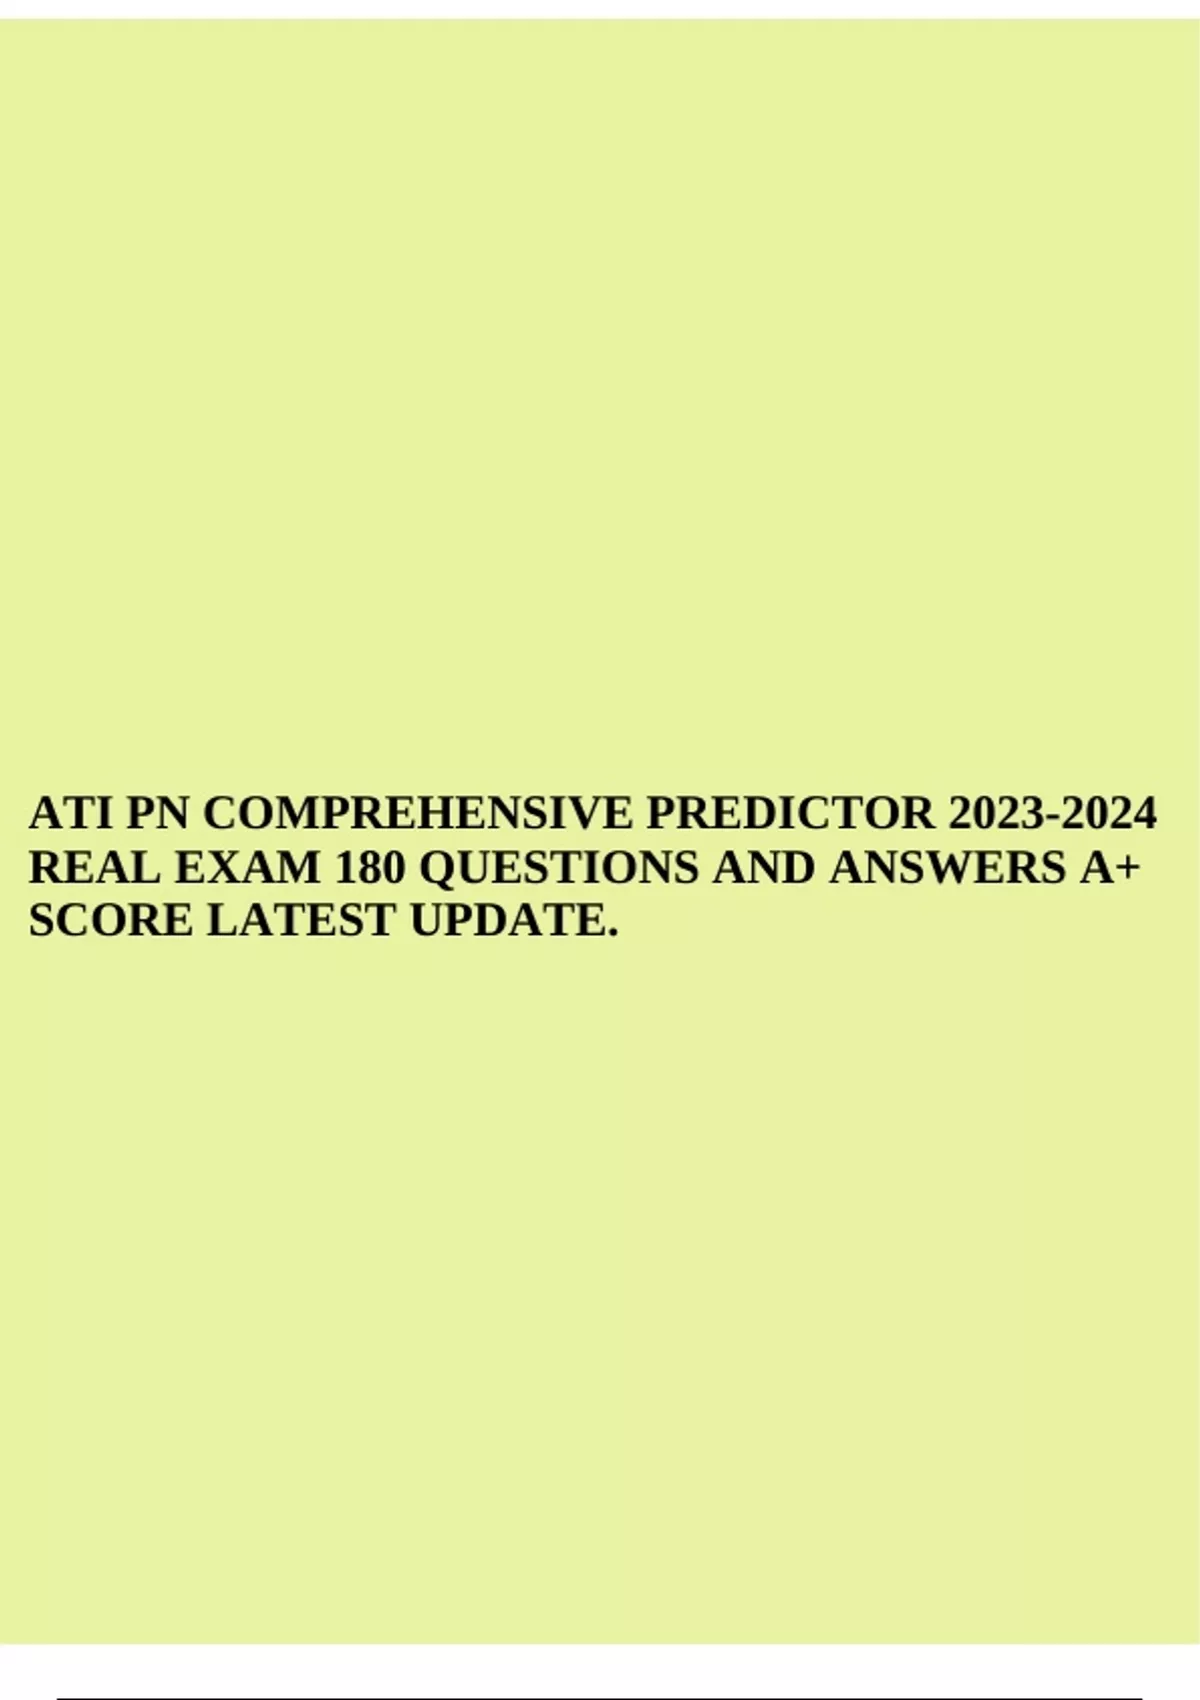 ATI PN COMPREHENSIVE PREDICTOR 20232024 REAL EXAM 180 QUESTIONS AND